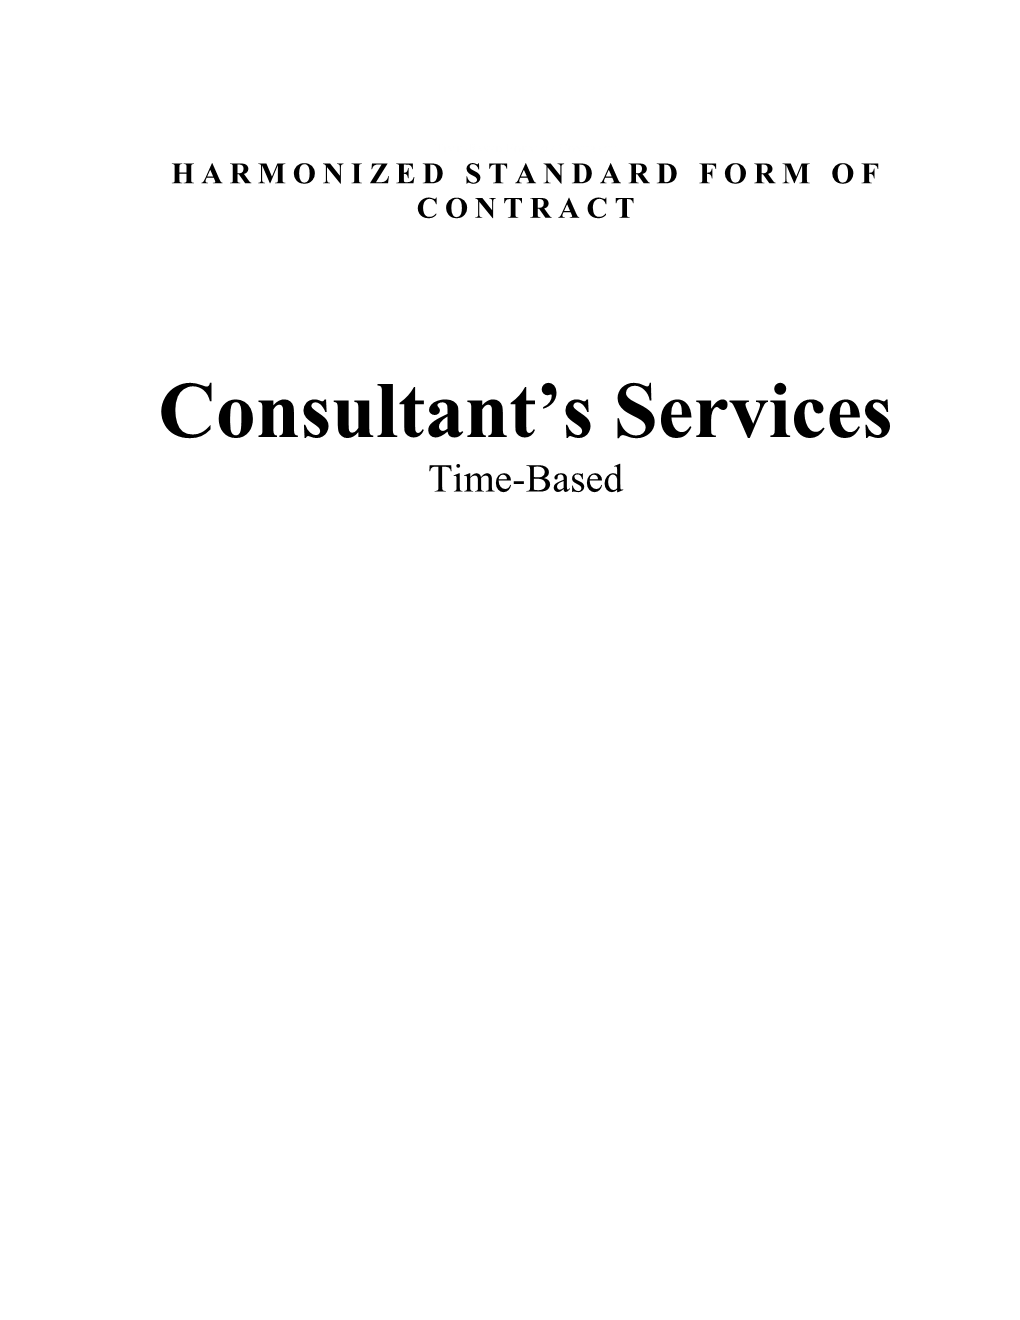 Time-Based Form of Contract